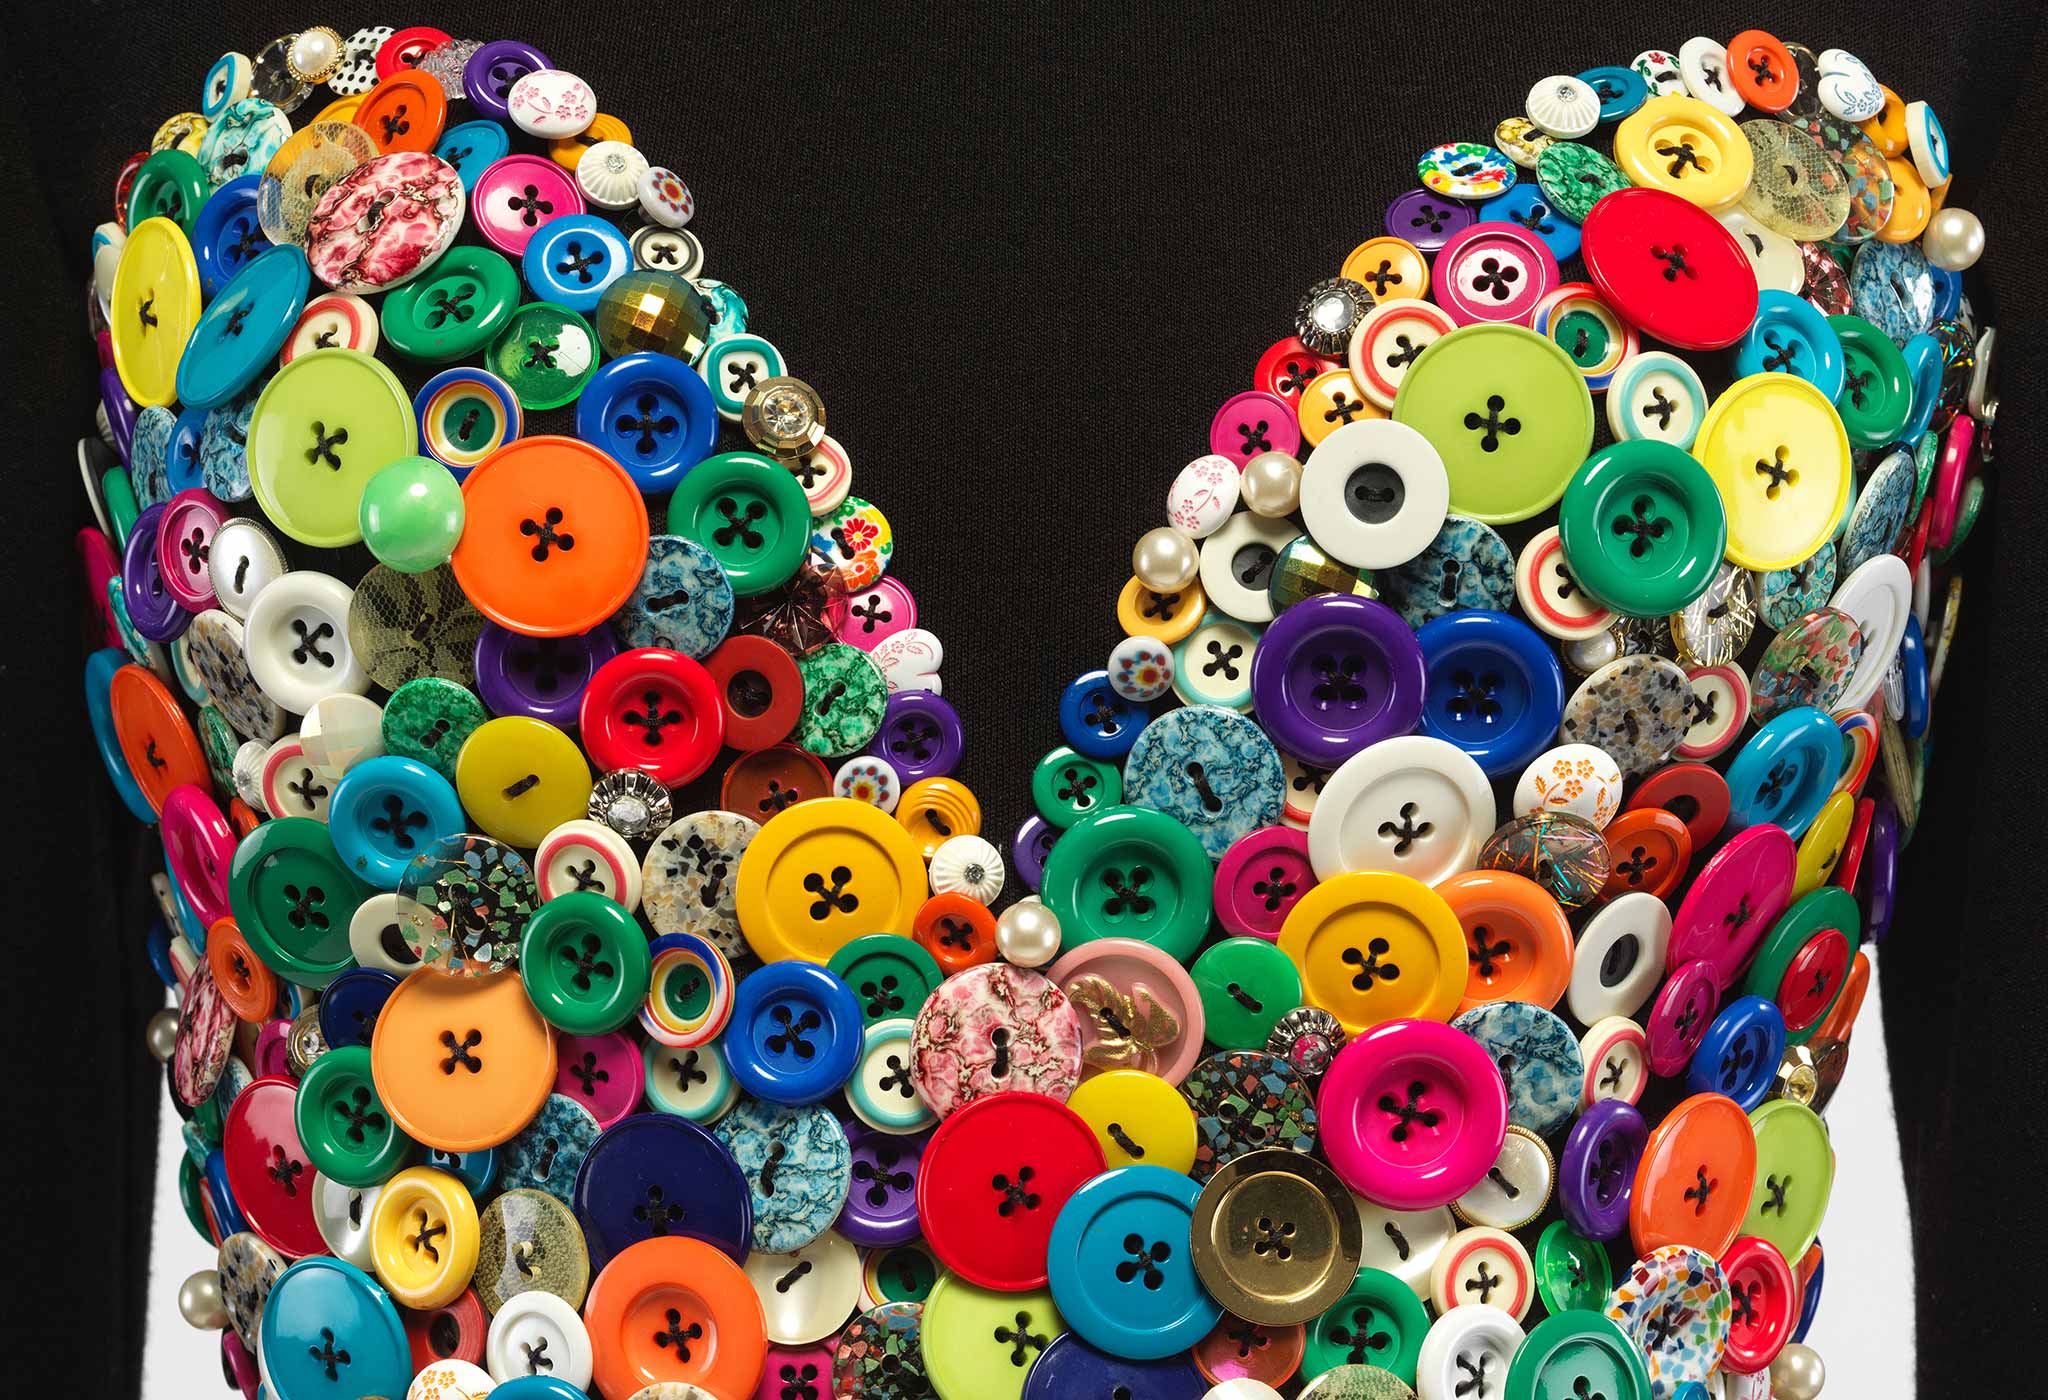 Detail of a black dress by Patrick Kelly with a large collection of colorful buttons in the shape of a heart on the bodice